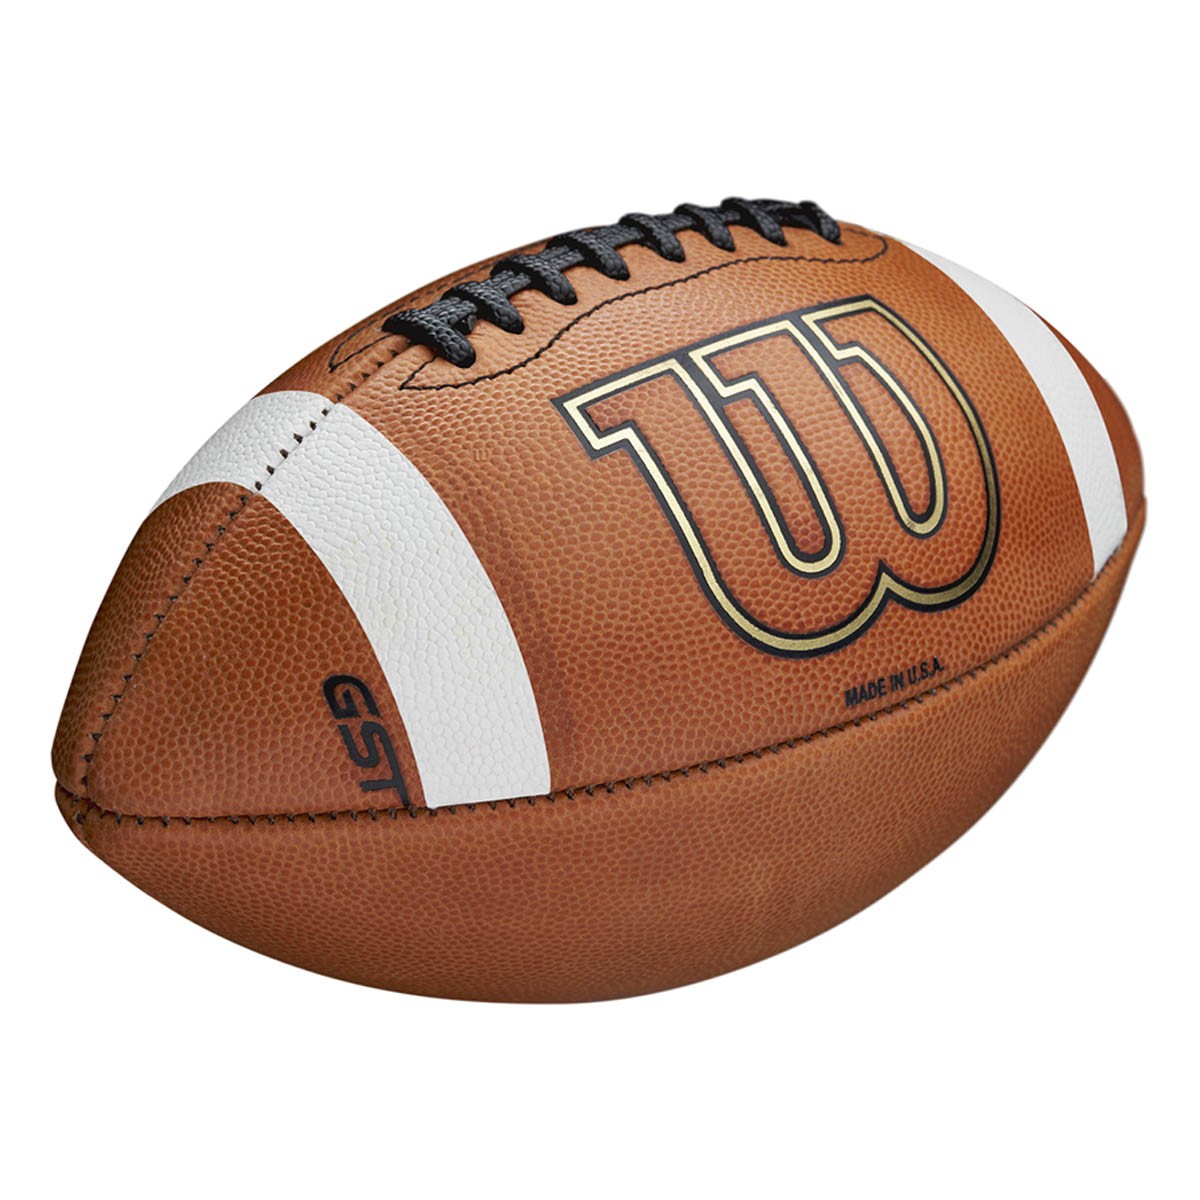 Wilson 1003 GST Leather Game Football - Official Size